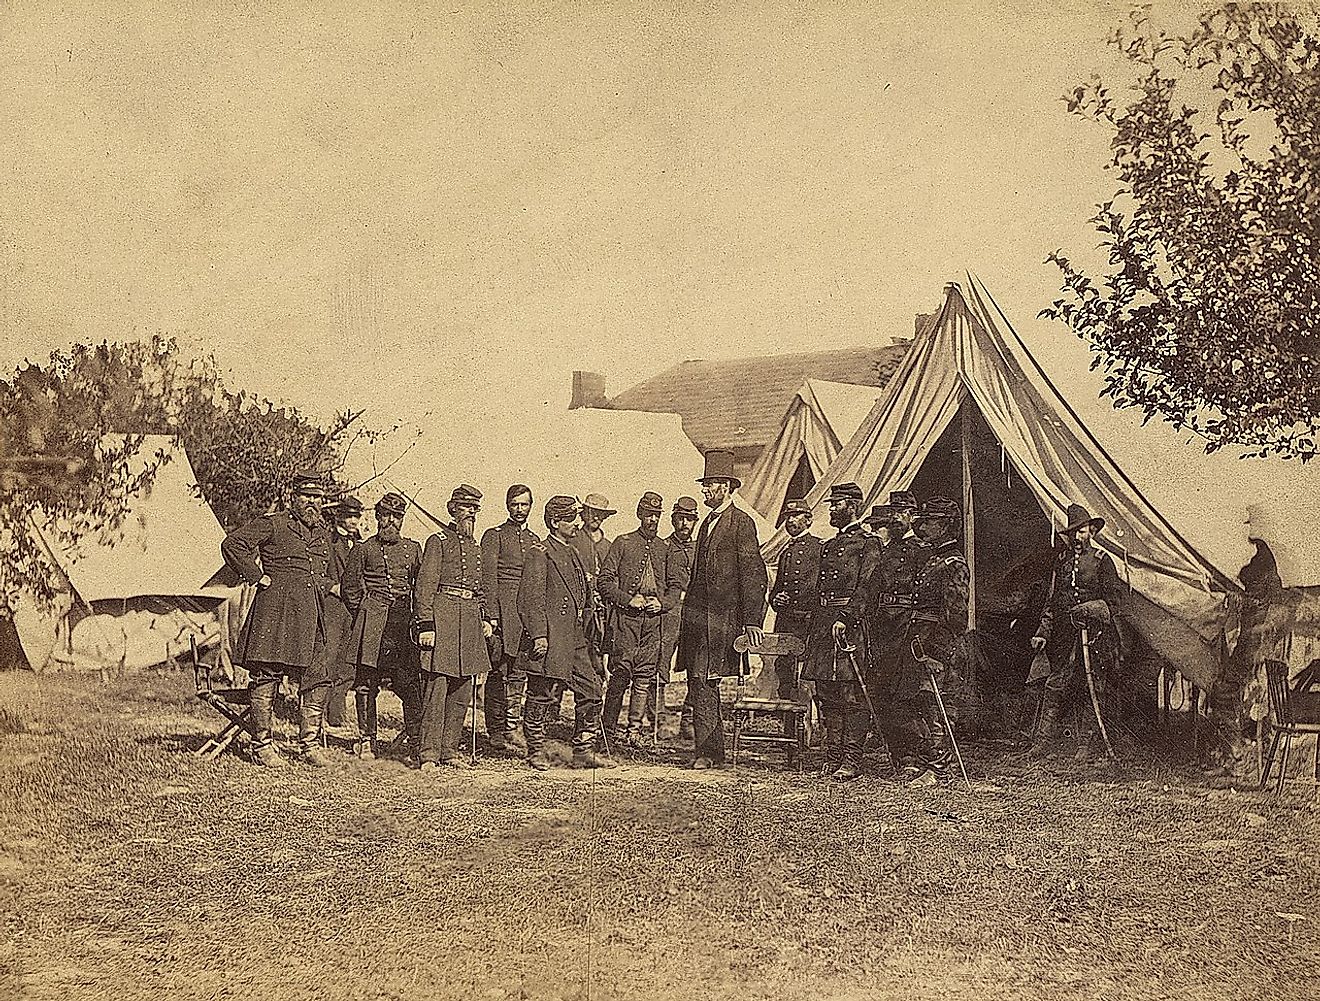 Lincoln with officers after the Battle of Antietam. Image credit: National Archives at College Park / Public domain